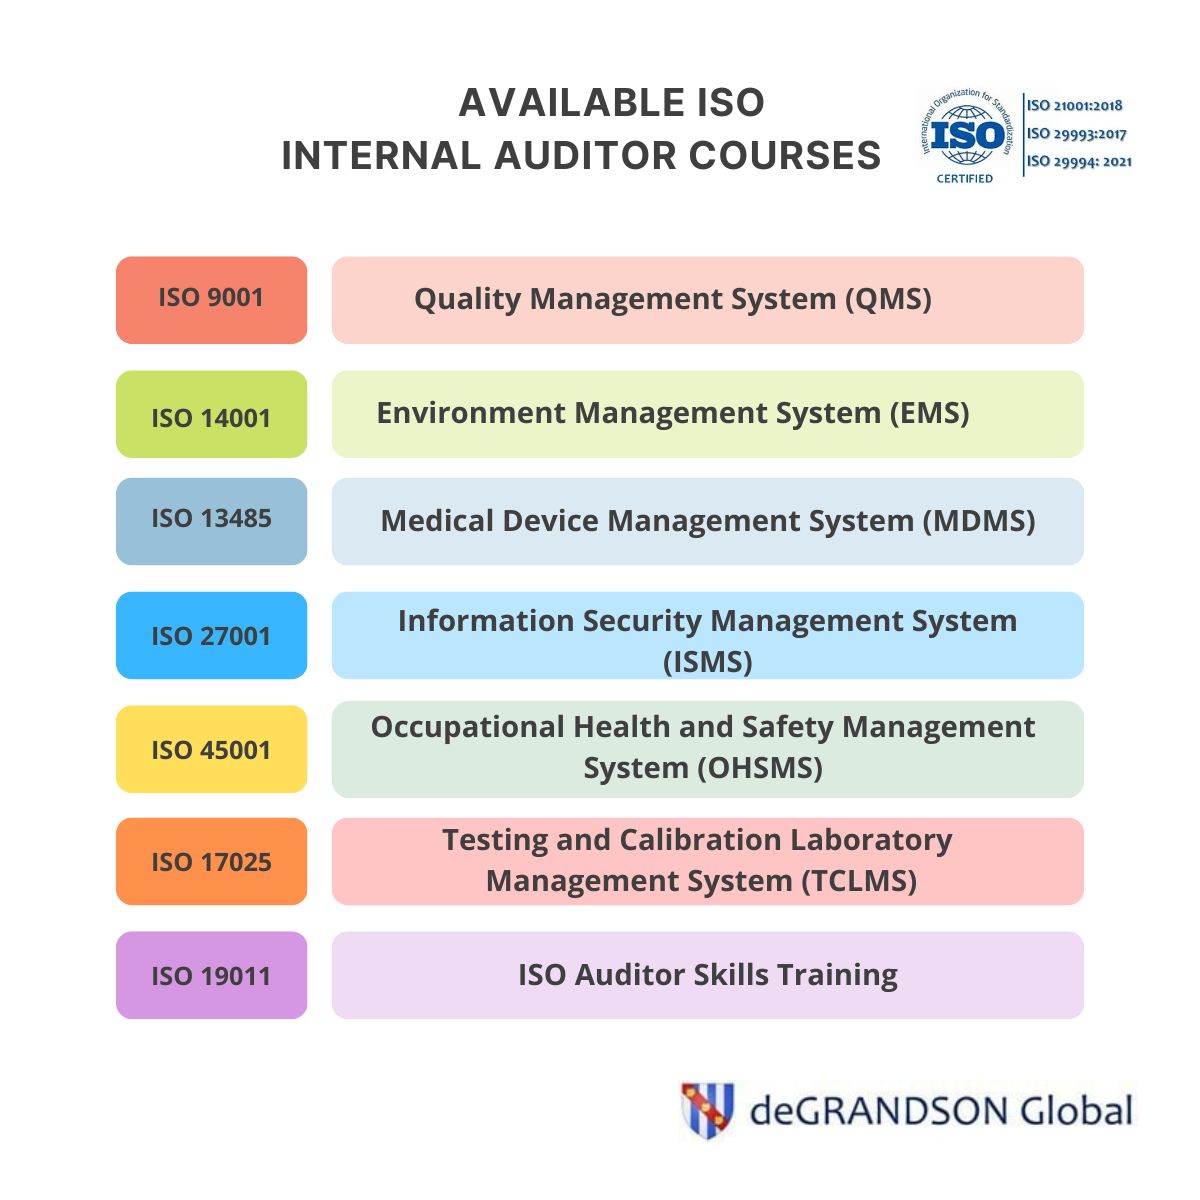 Chart showing the list of different ISO internal auditor courses that deGRANDSON offers arranged by standard